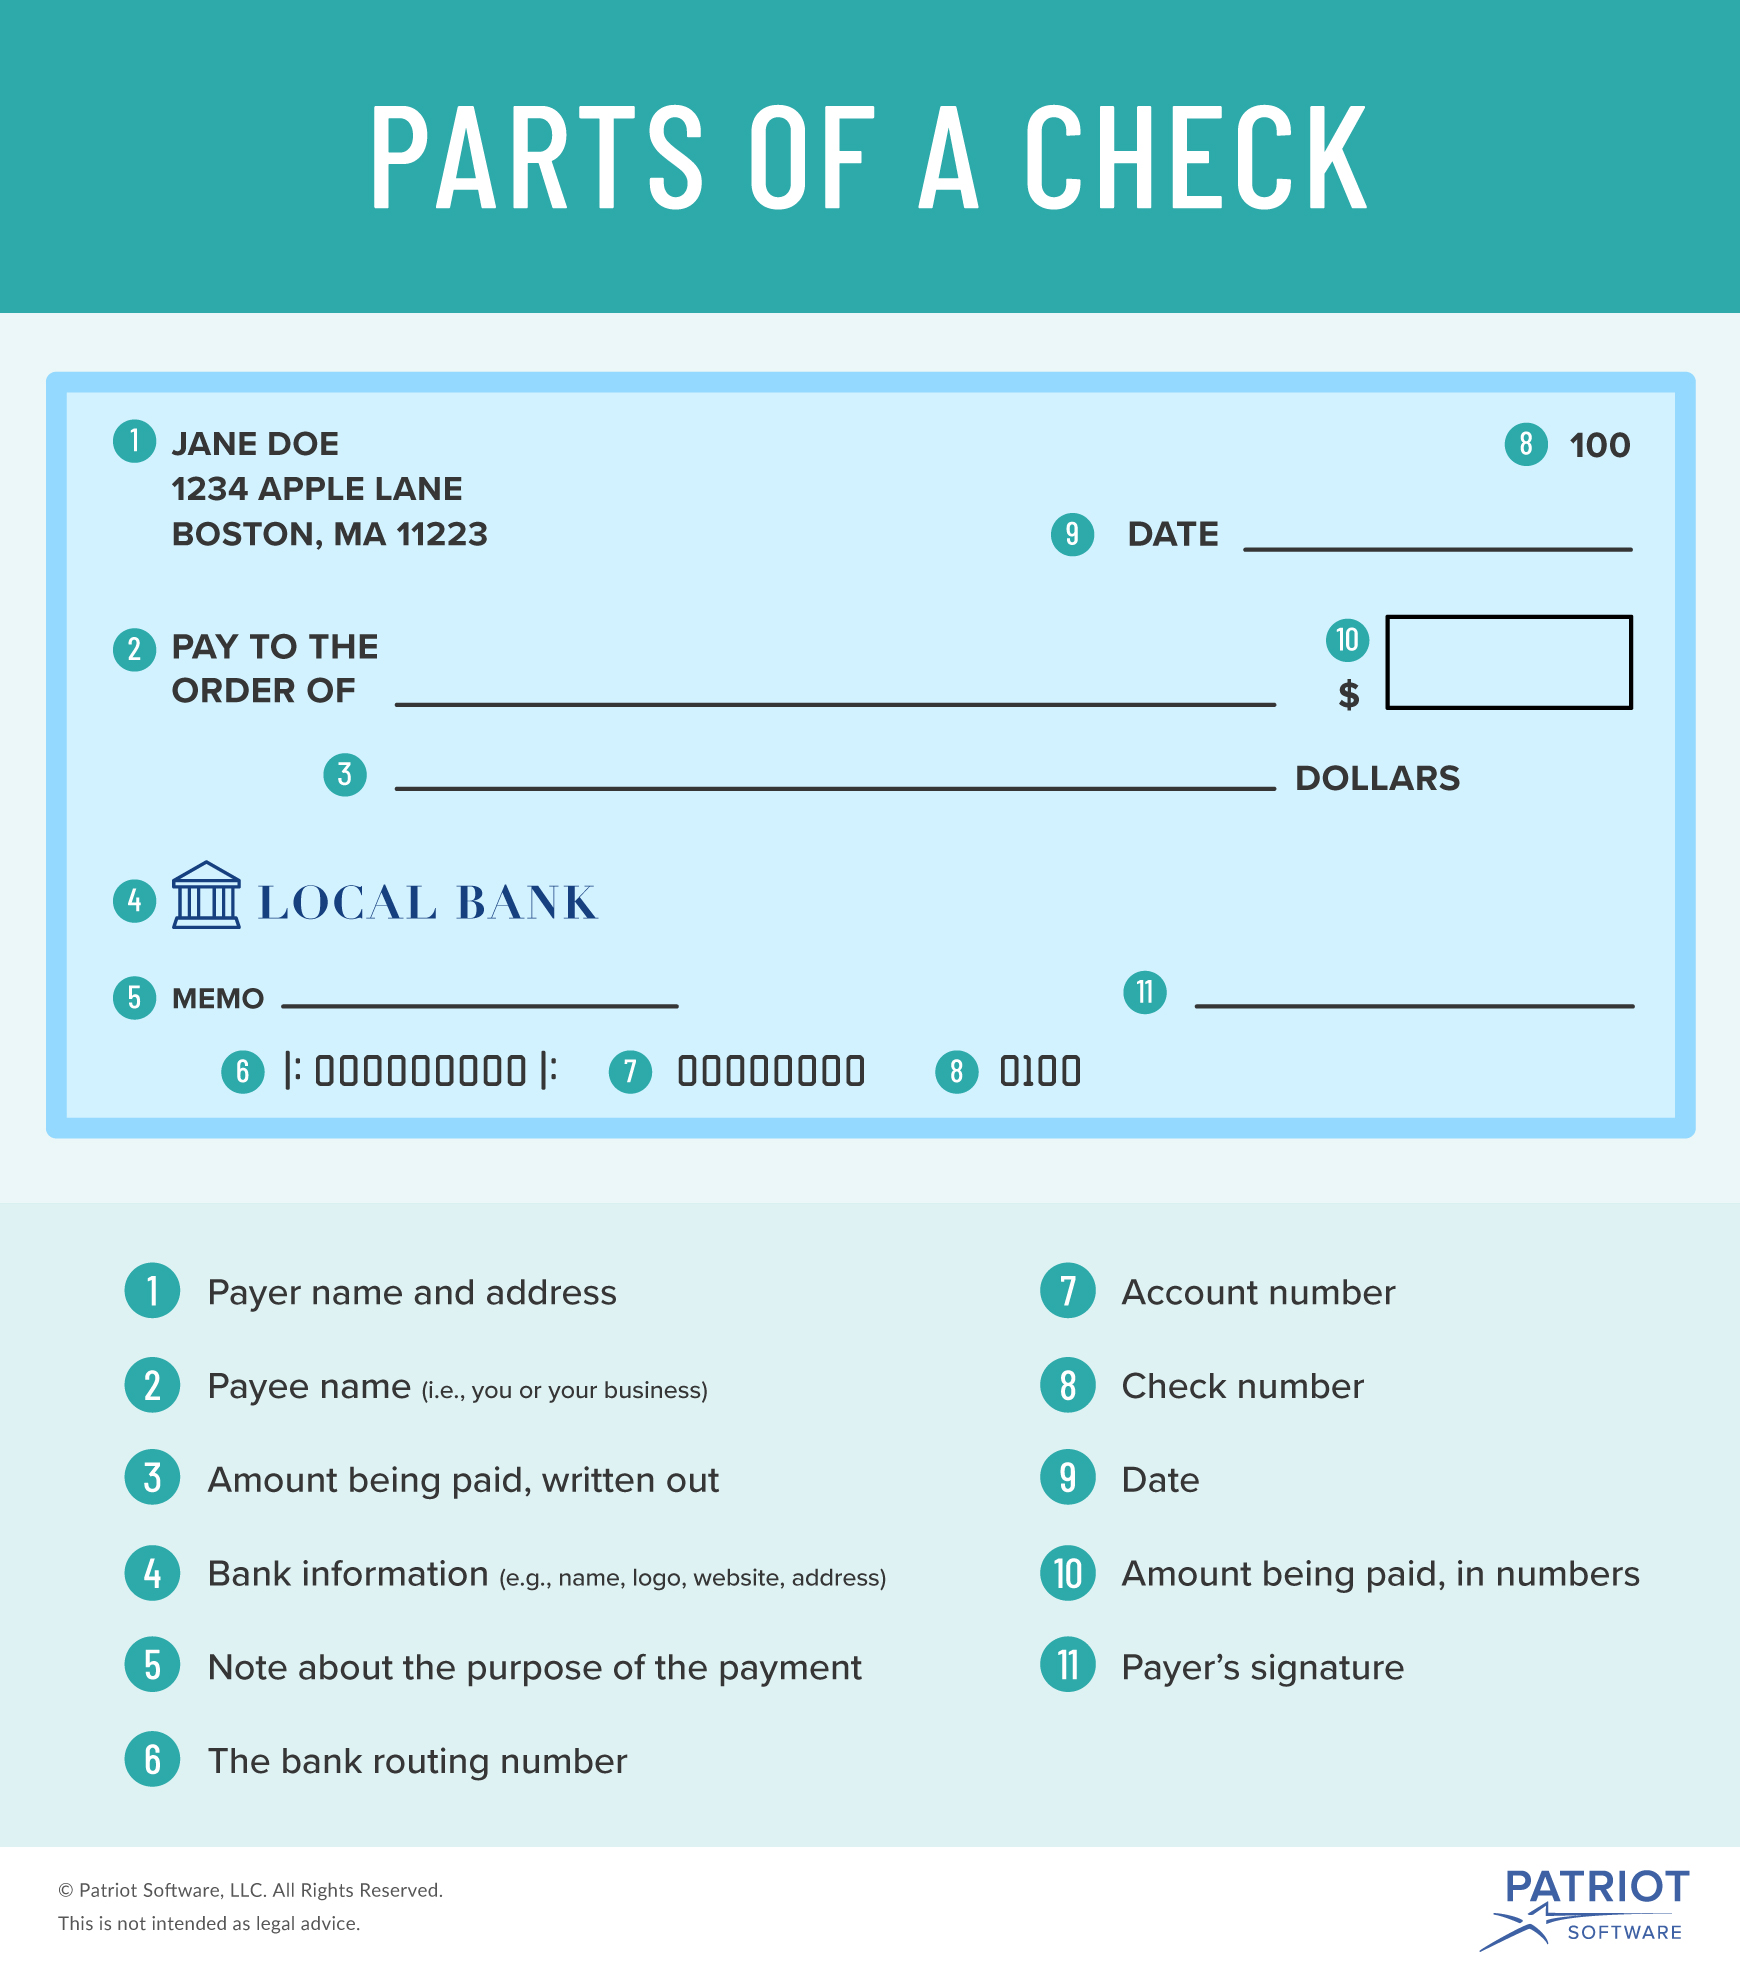 parts of a check visual to help avoid accepting counterfeit checks